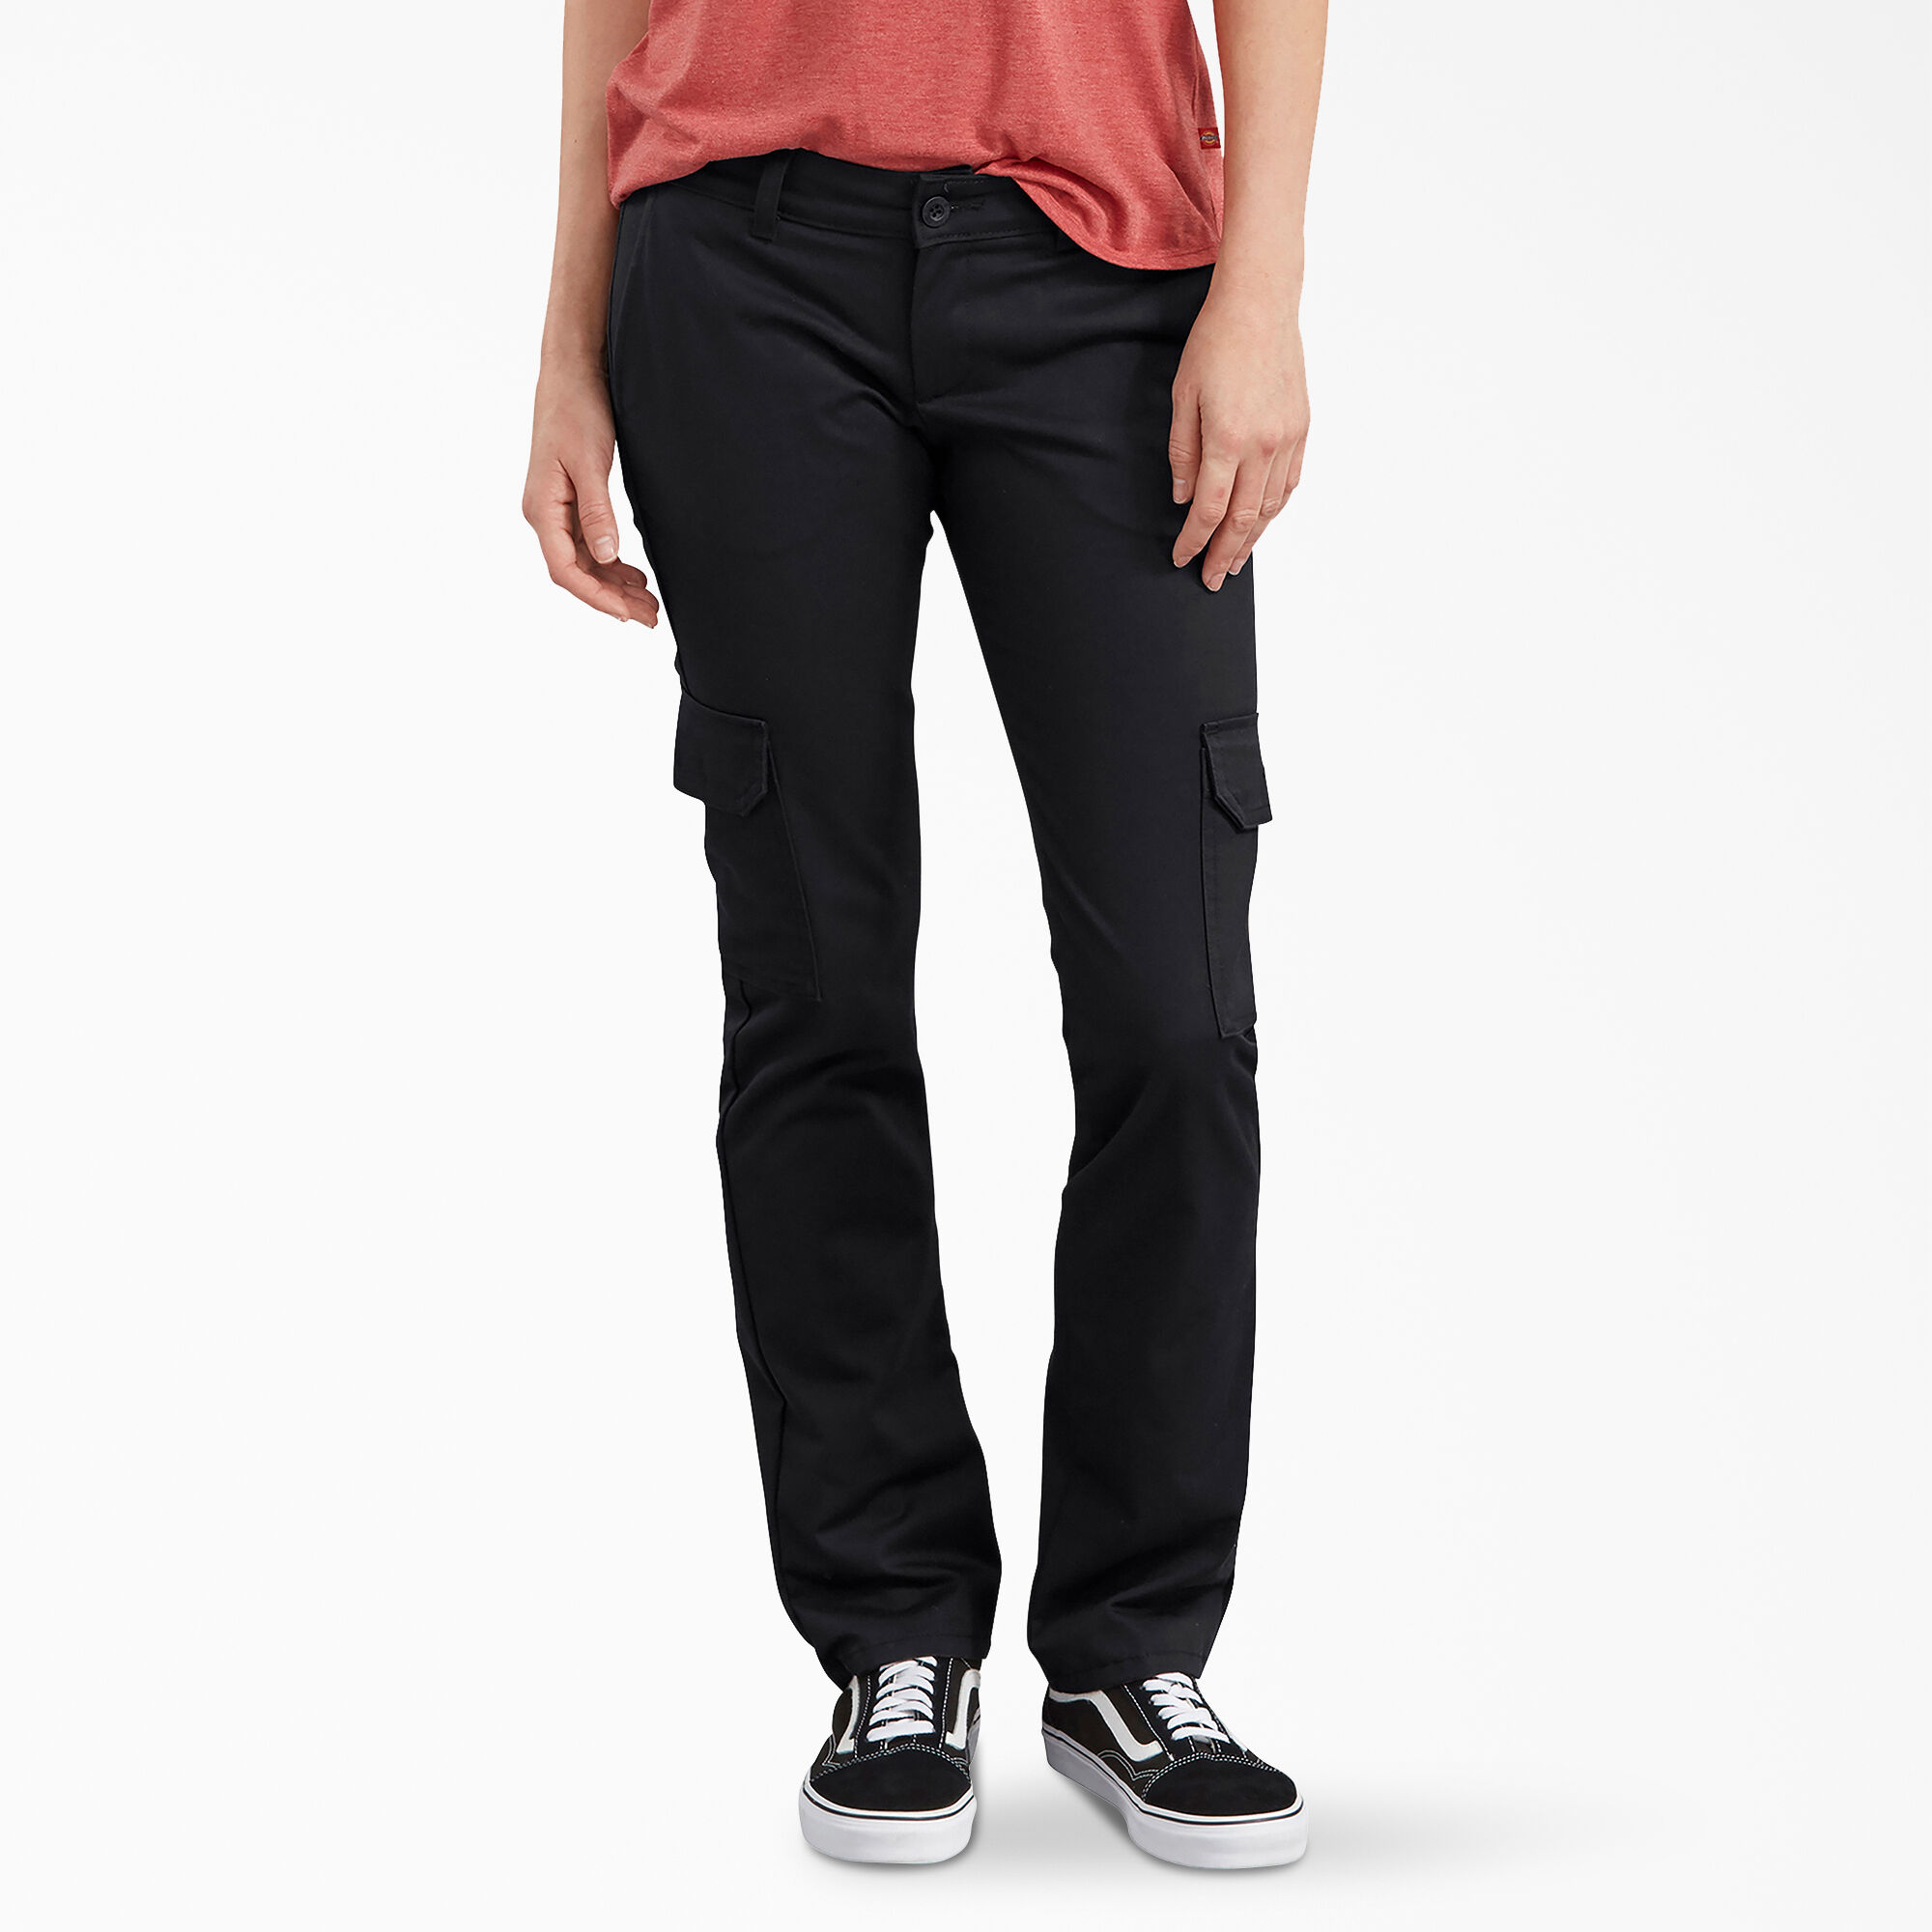 women's fitted cargo pants